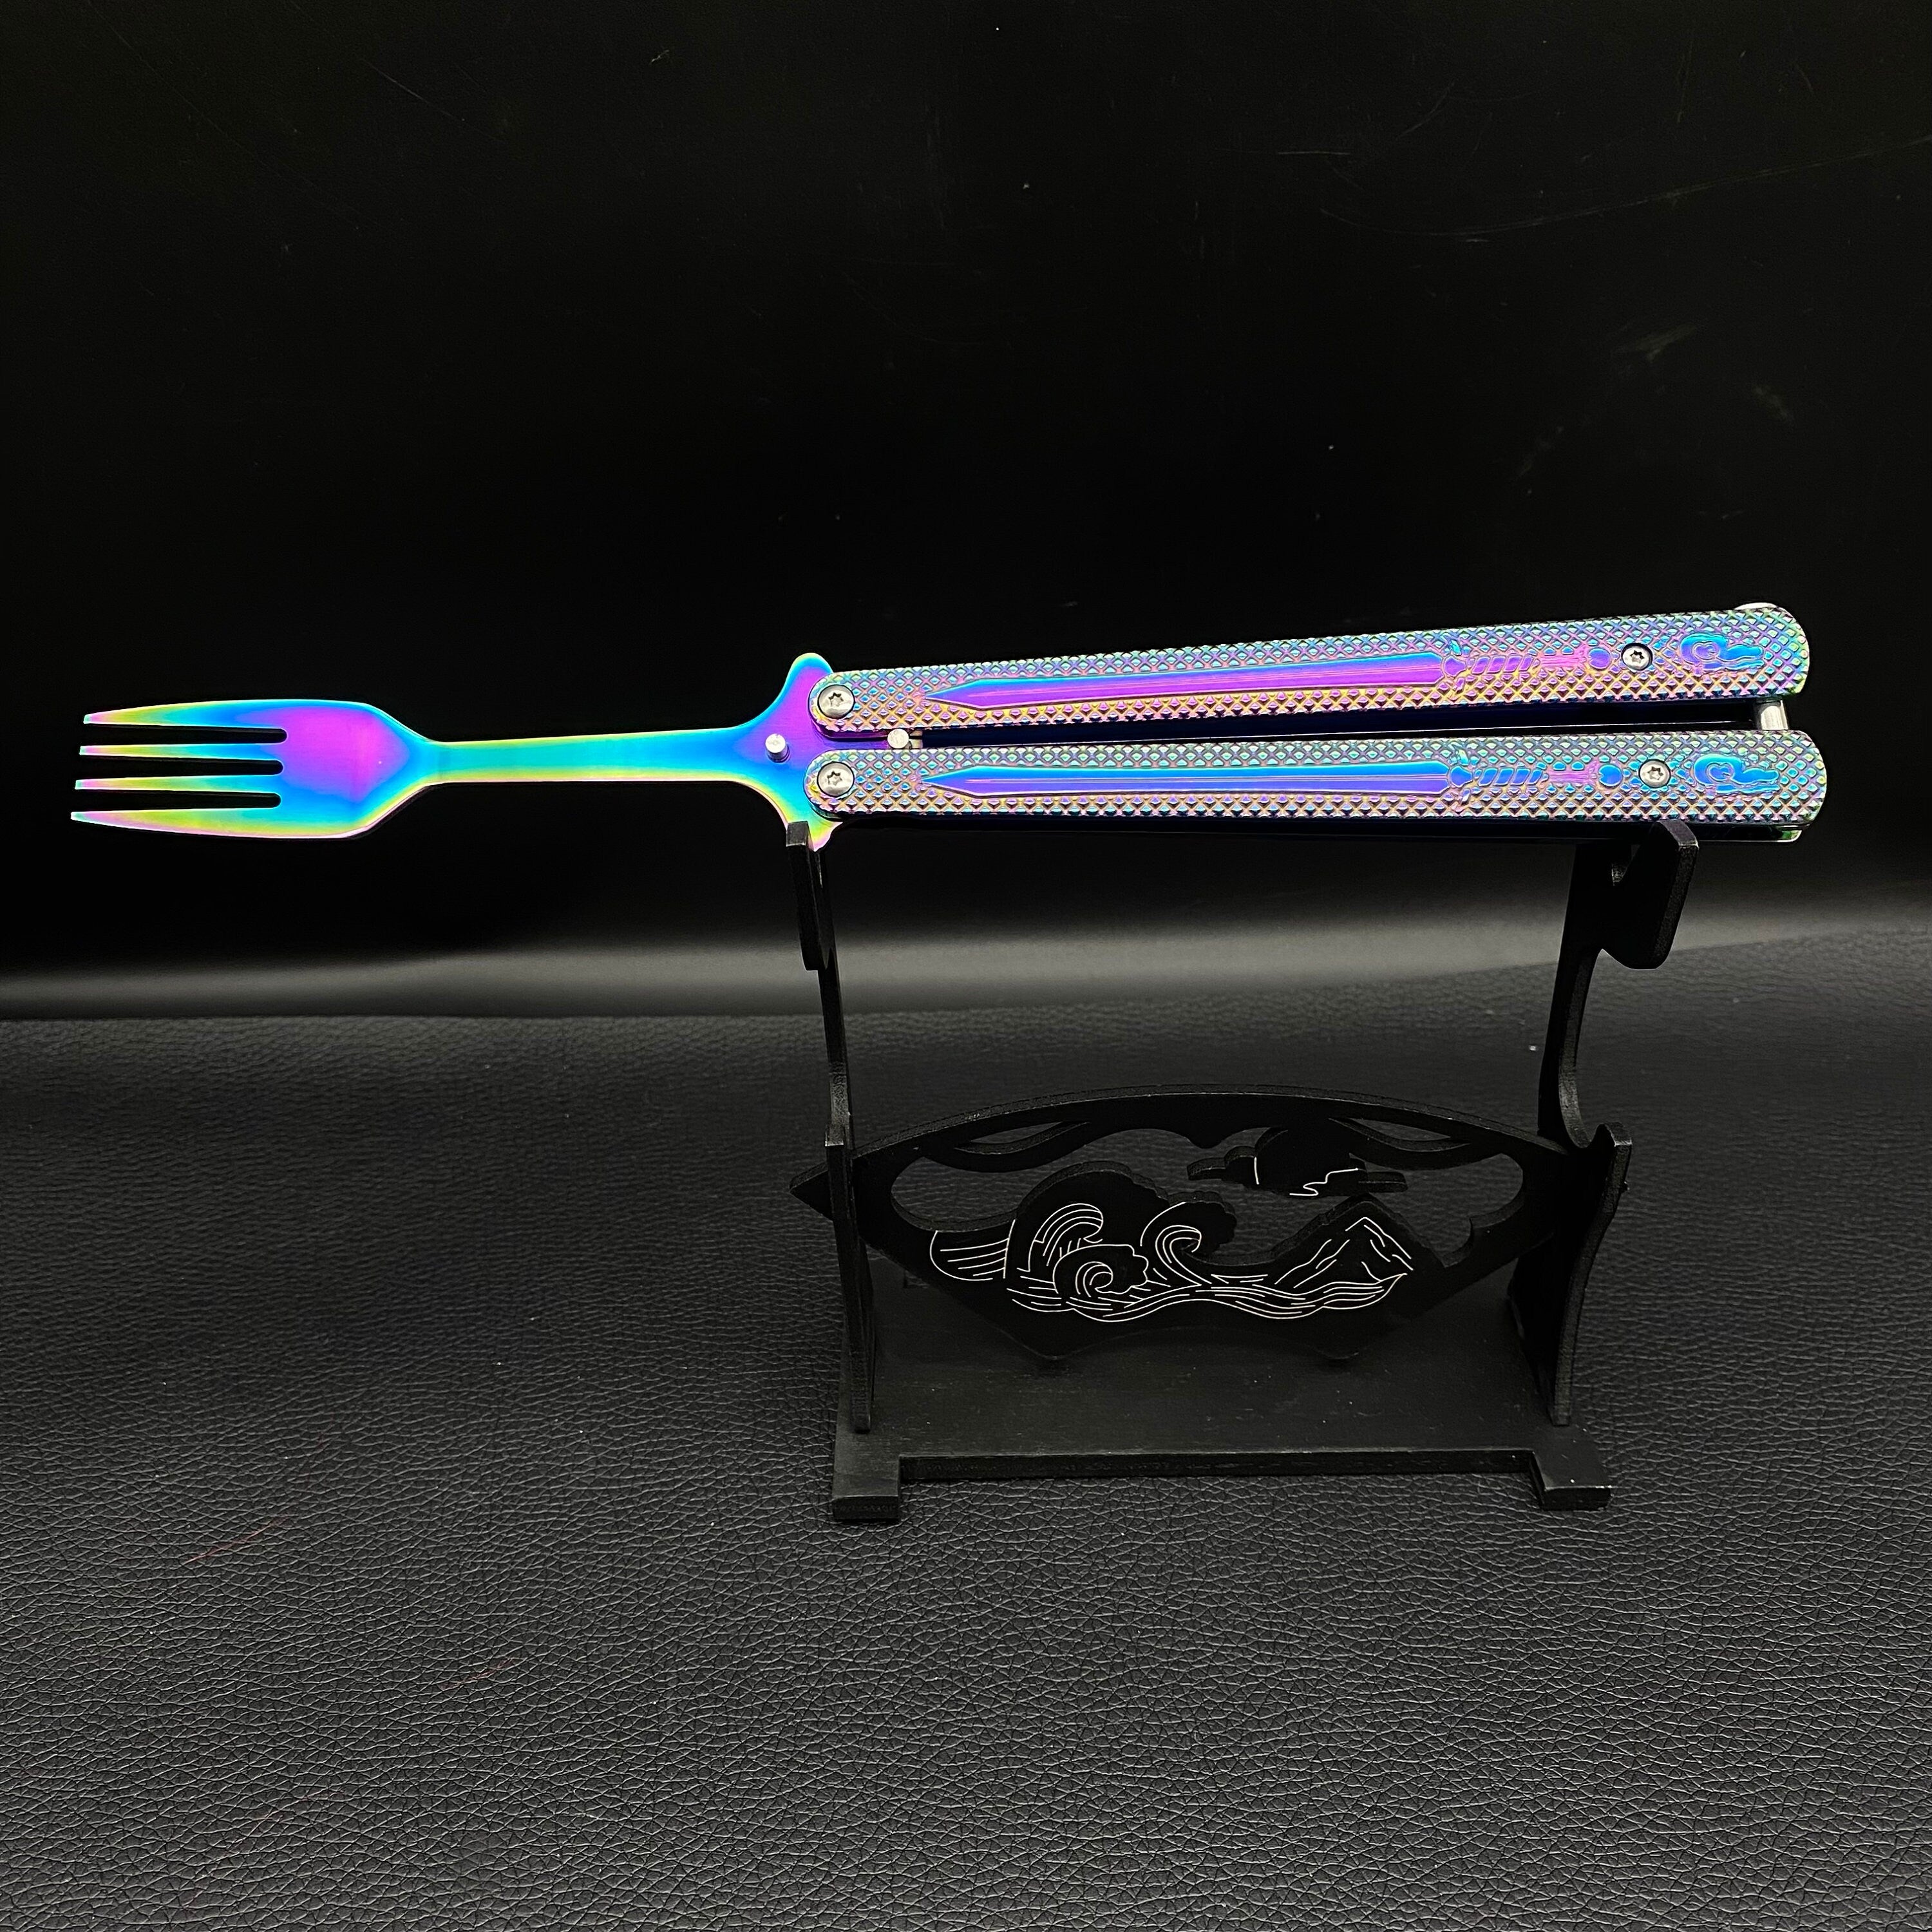 Creative Fork and Spoon Butterfly Knife